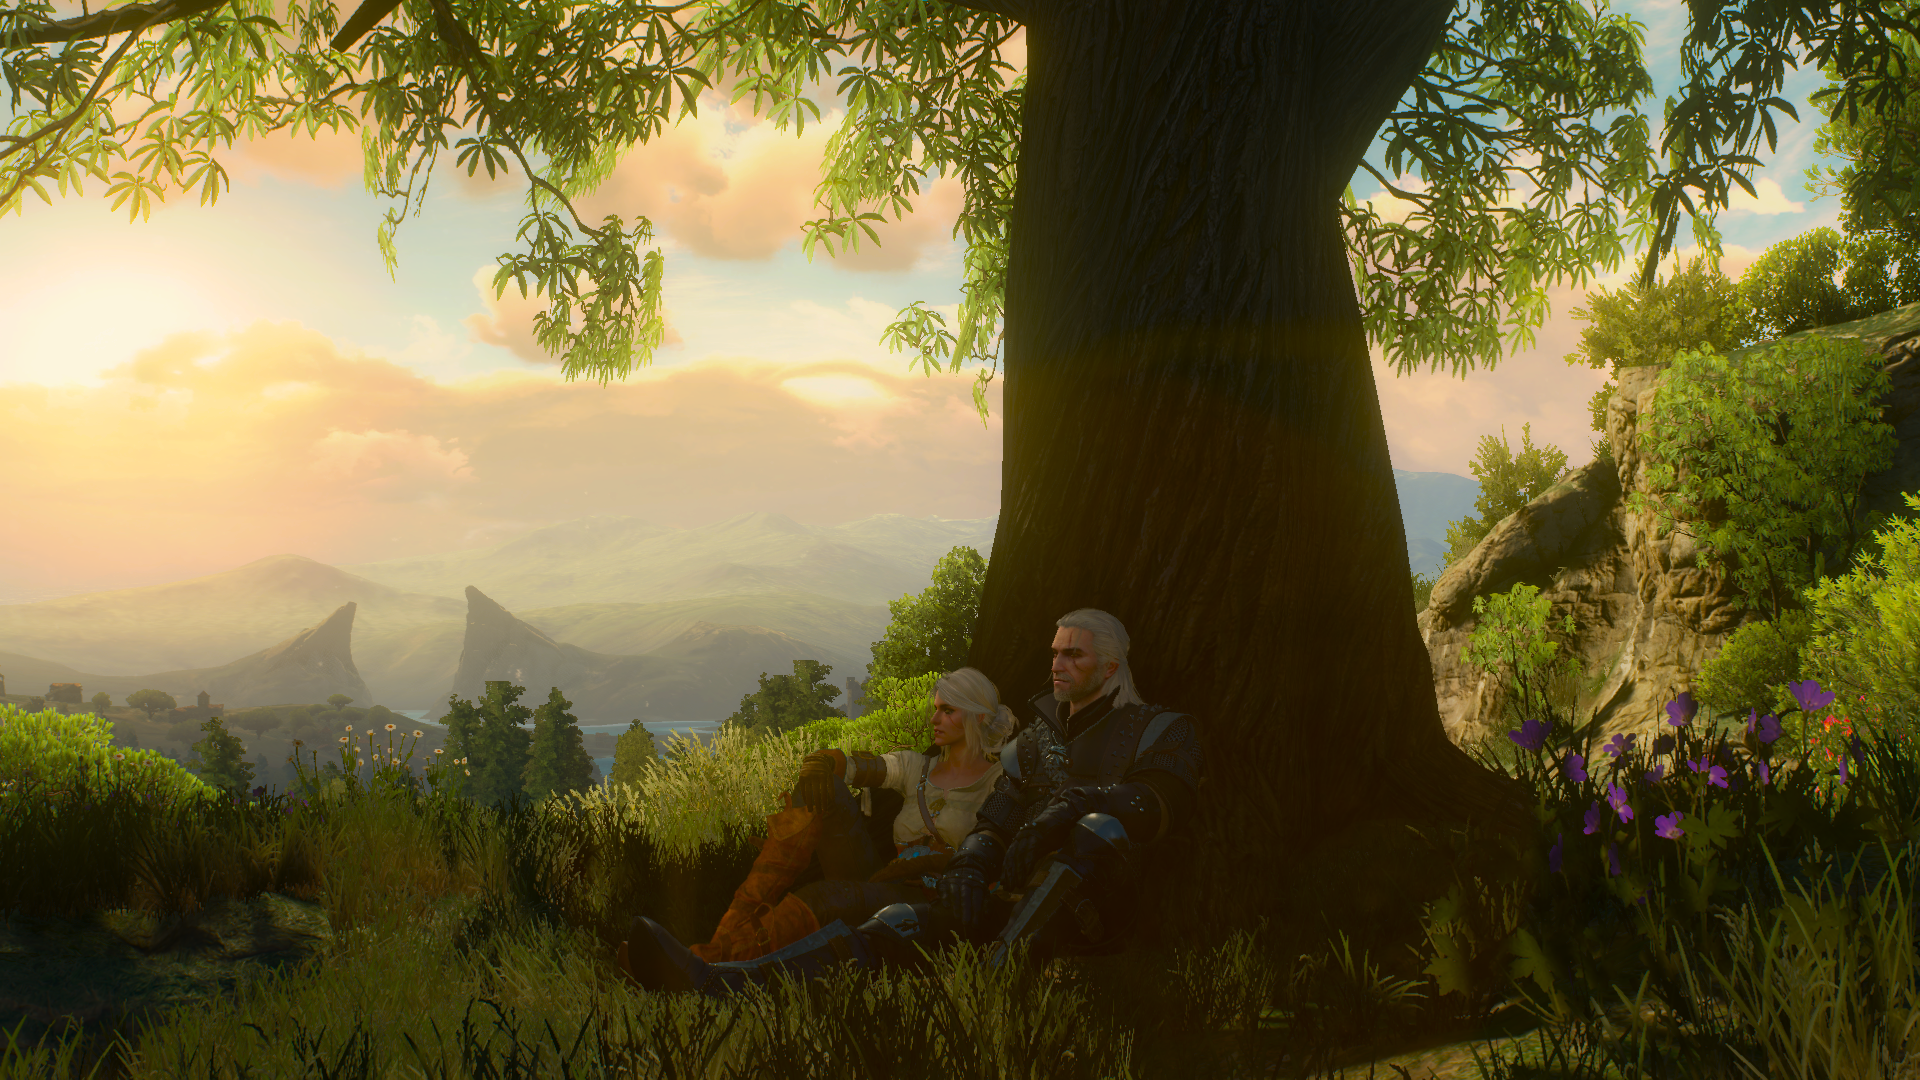 The Witcher The Witcher 3 Video Games Screen Shot Toussaint CD Projekt RED Ciri The Witcher Geralt O 1920x1080